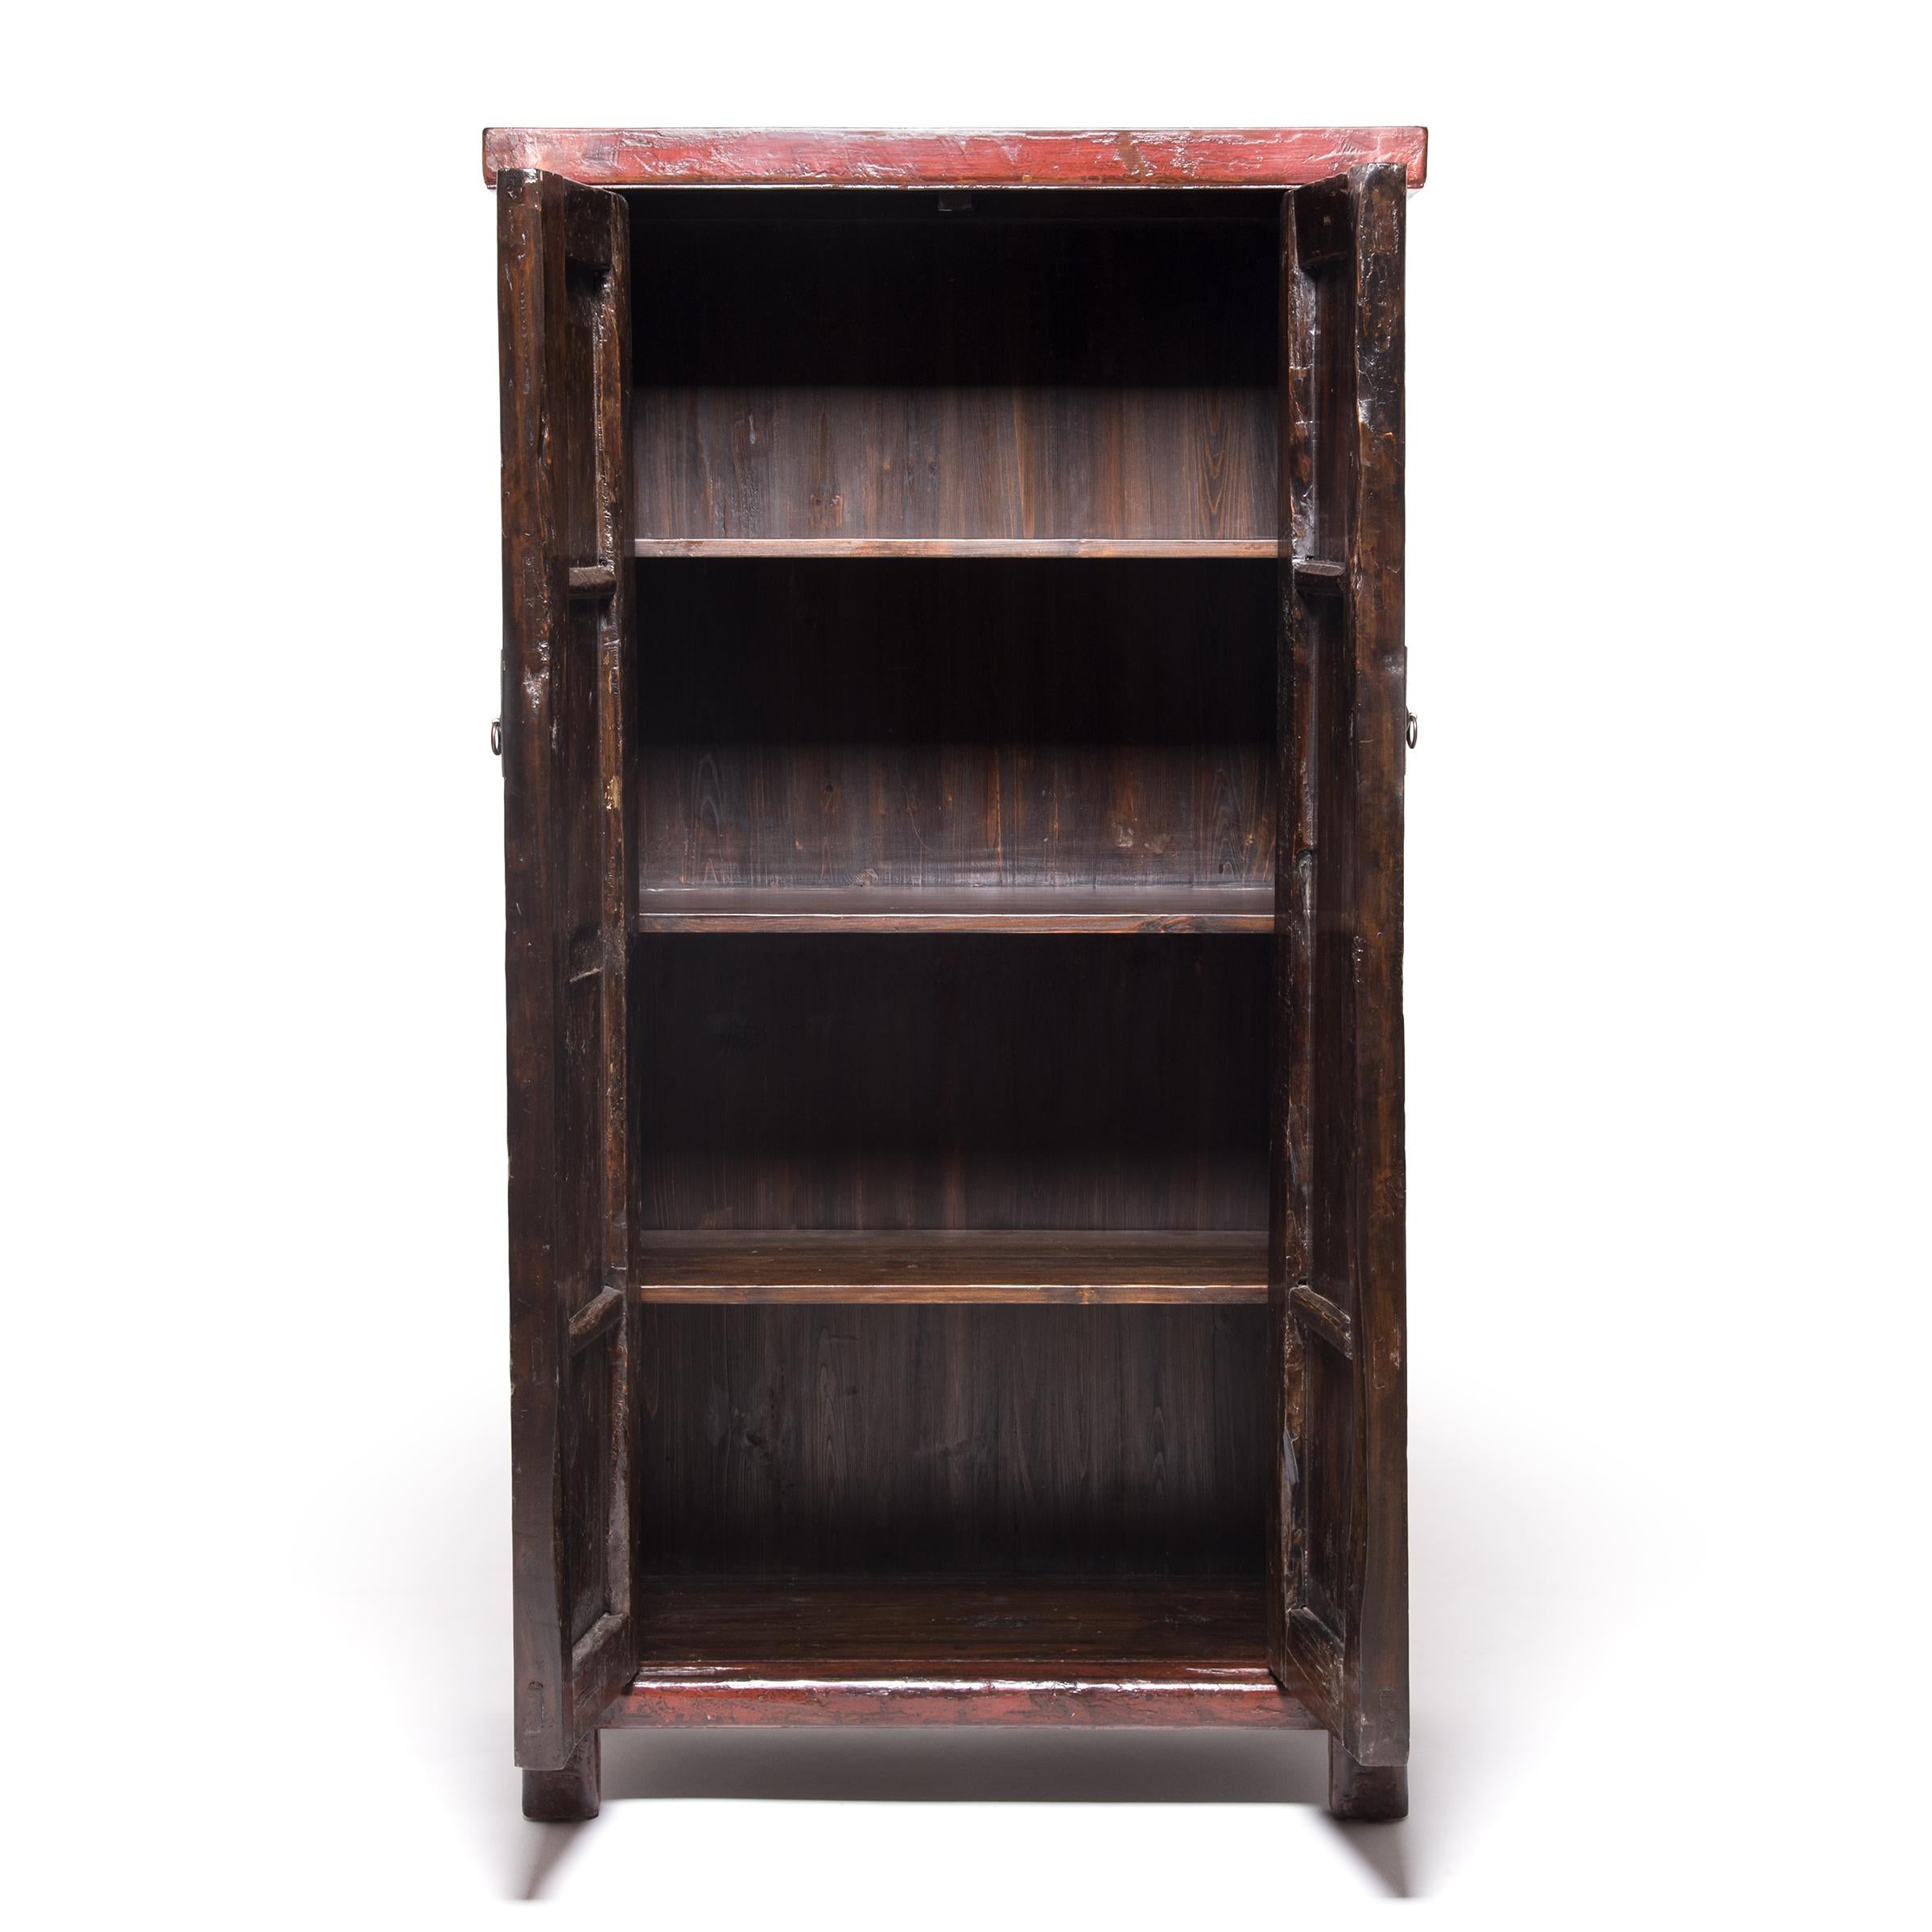 This richly lacquered cabinet from China's Shanxi province is over a century and a half old, with a finish that has acquired wonderful character and texture with age. Collectors appreciate cabinets configured like this—with doors that span full